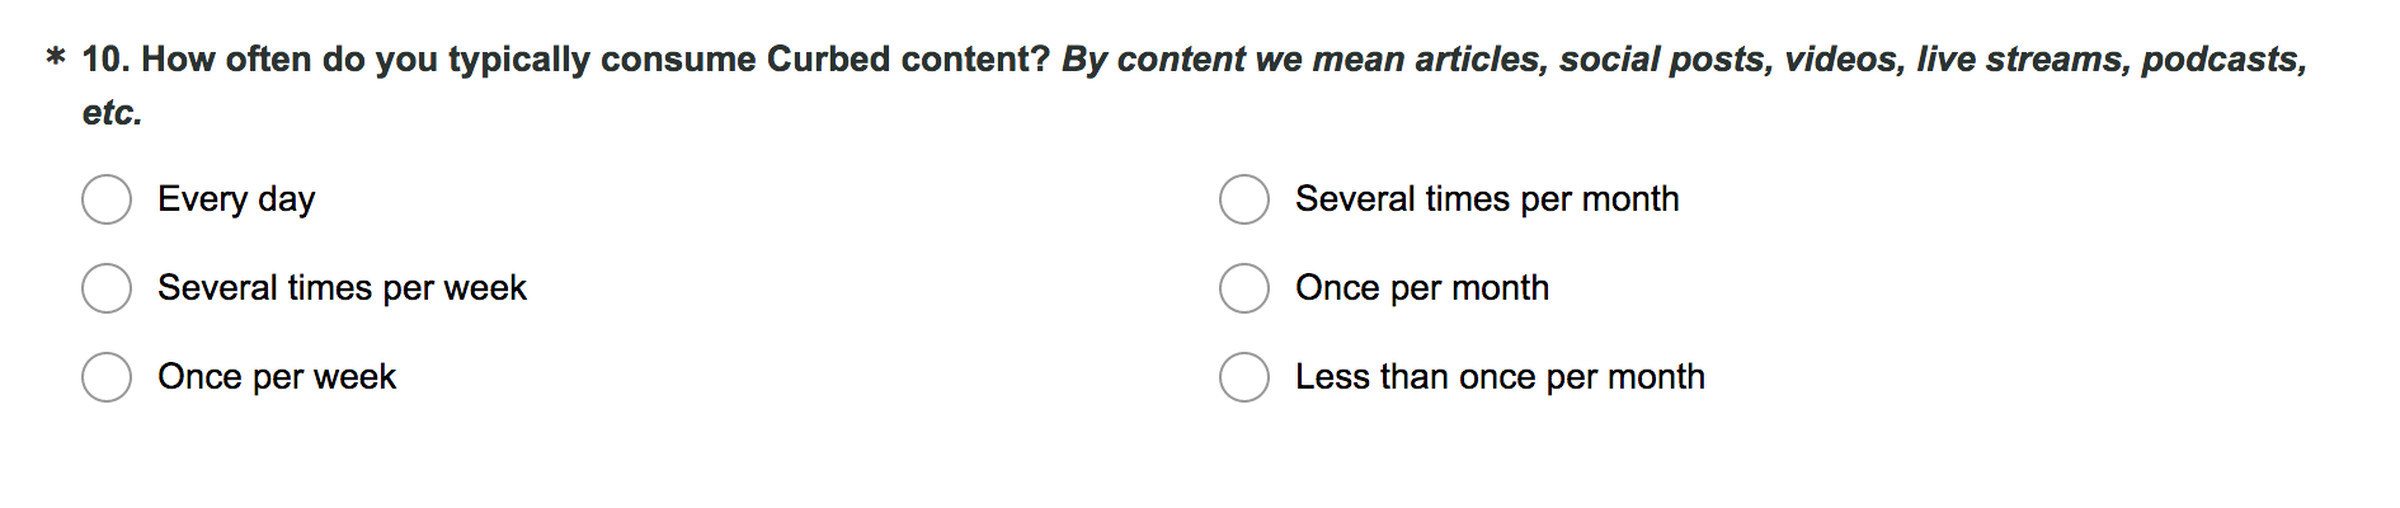 Sample of a survey question for Curbed.com